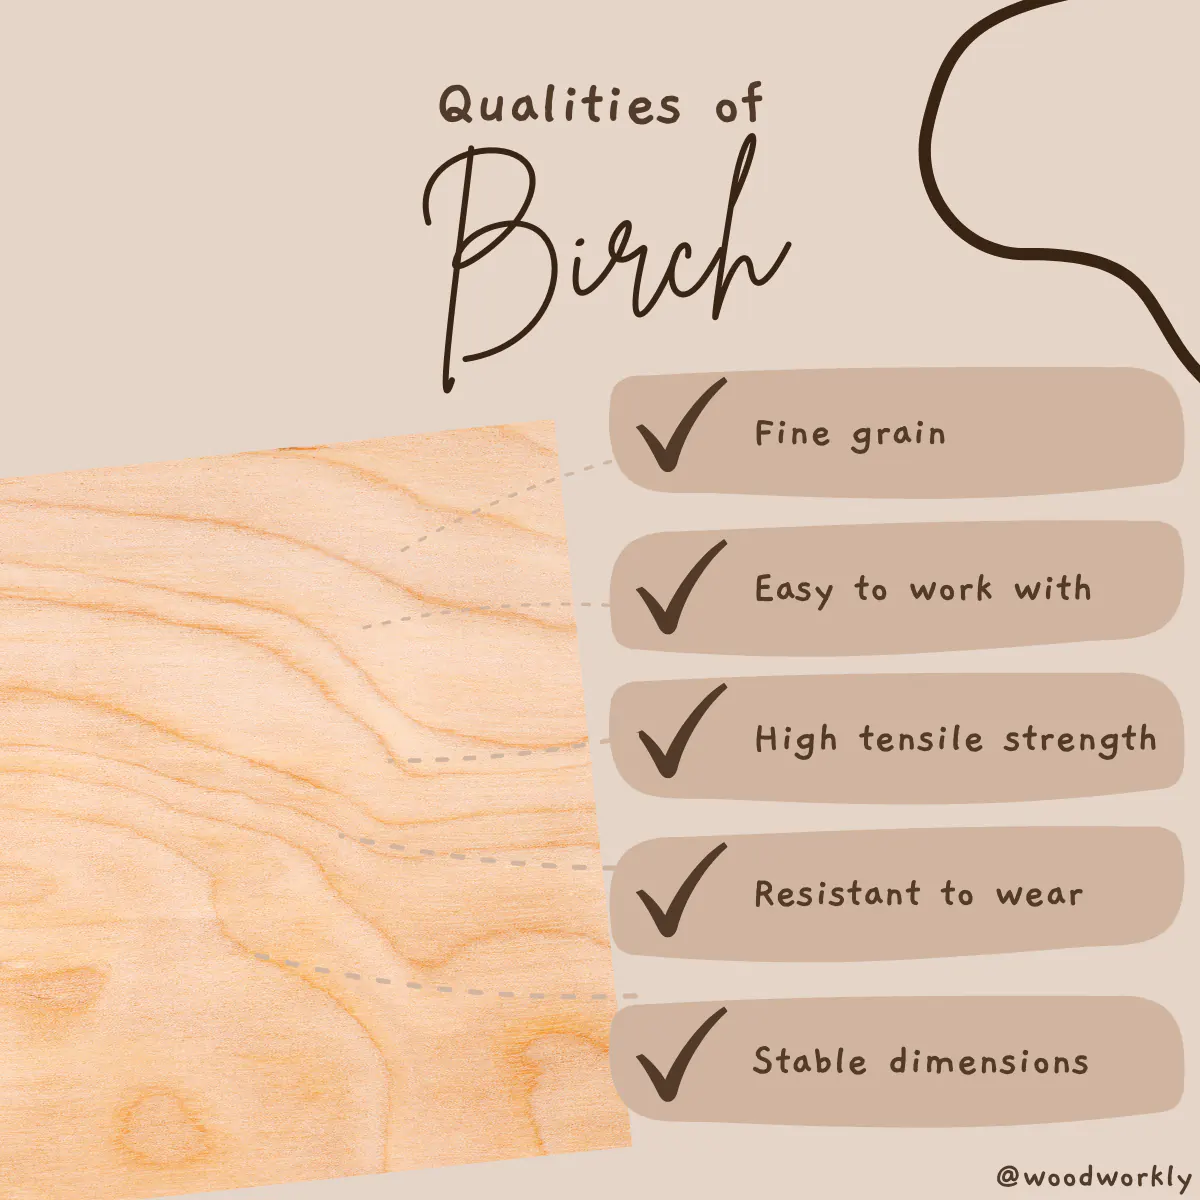 Qualities of Birch wood important when making a bed frame